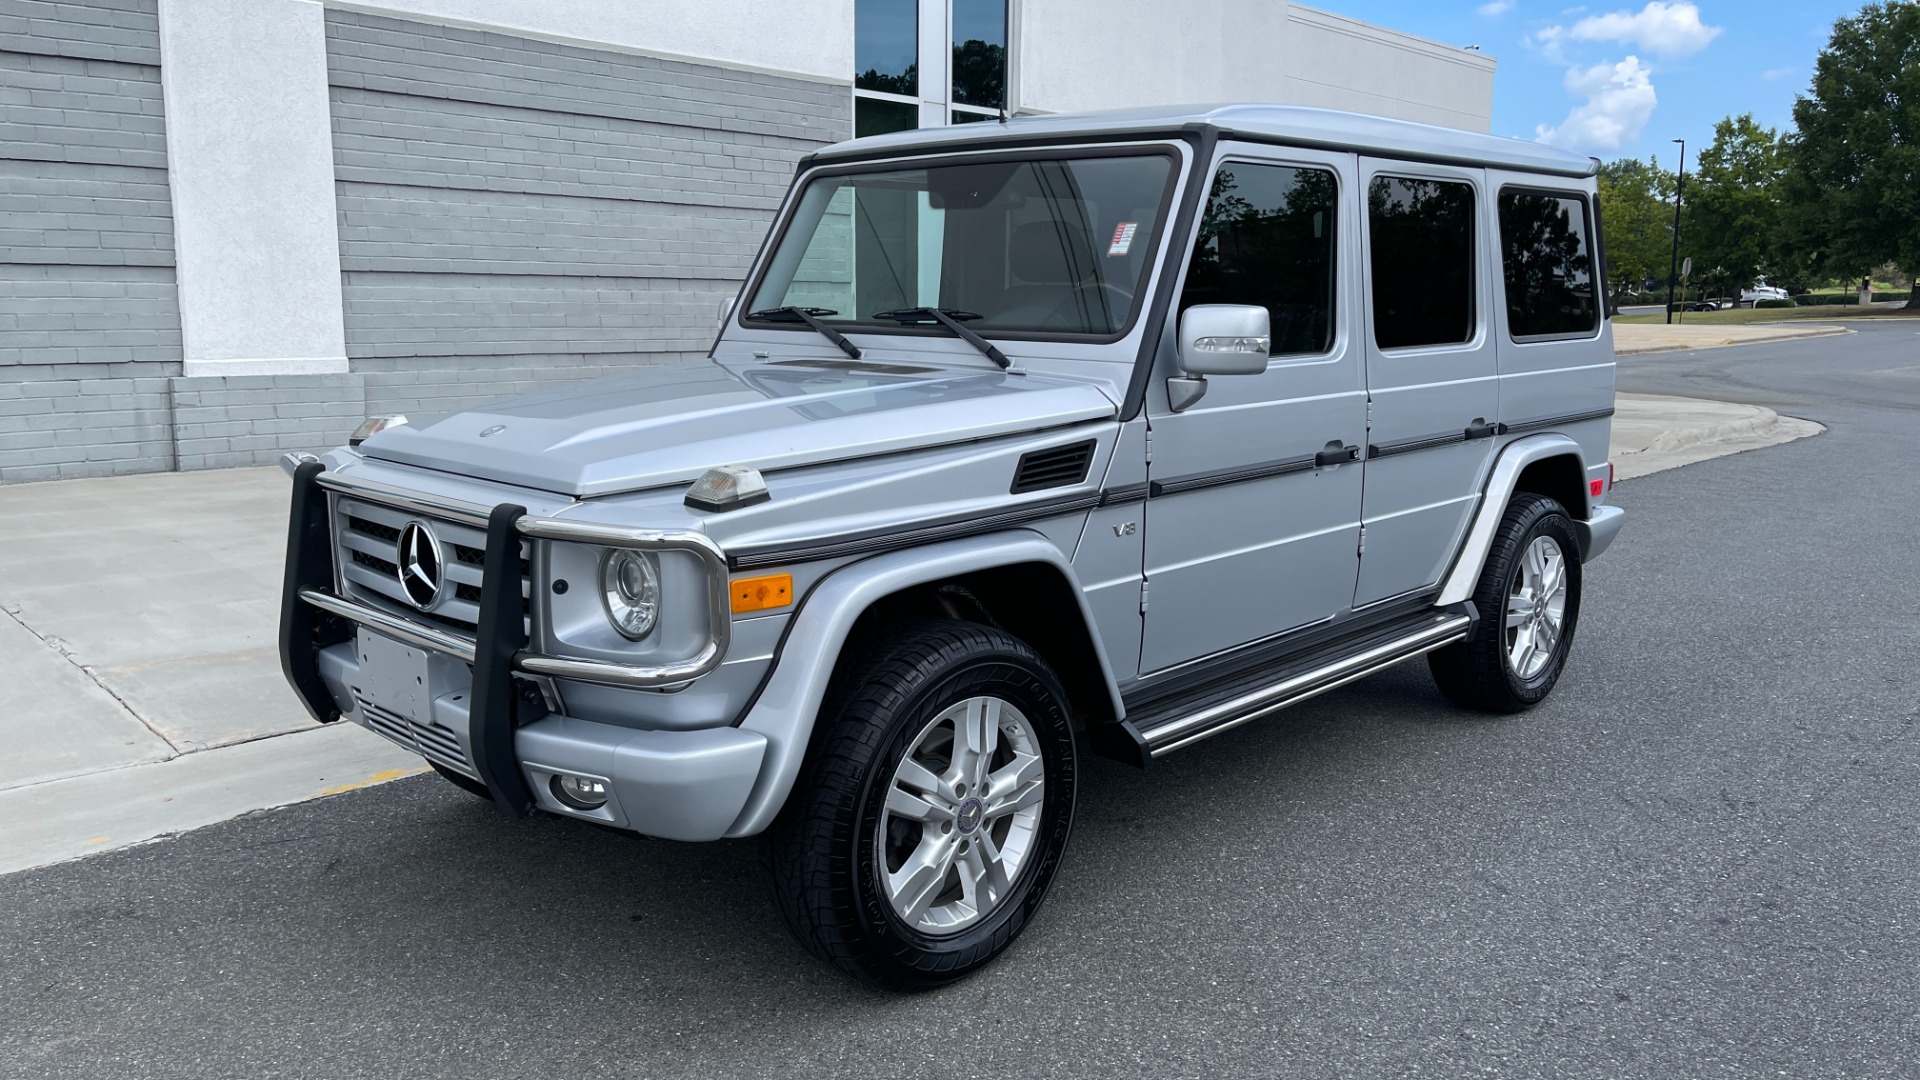 Used 2009 Mercedes-Benz G-Class 5.5L / G550 / NAV / REARVIEW / COOLED SEATS / HEATED SEATS / SUNROOF for sale $52,995 at Formula Imports in Charlotte NC 28227 3